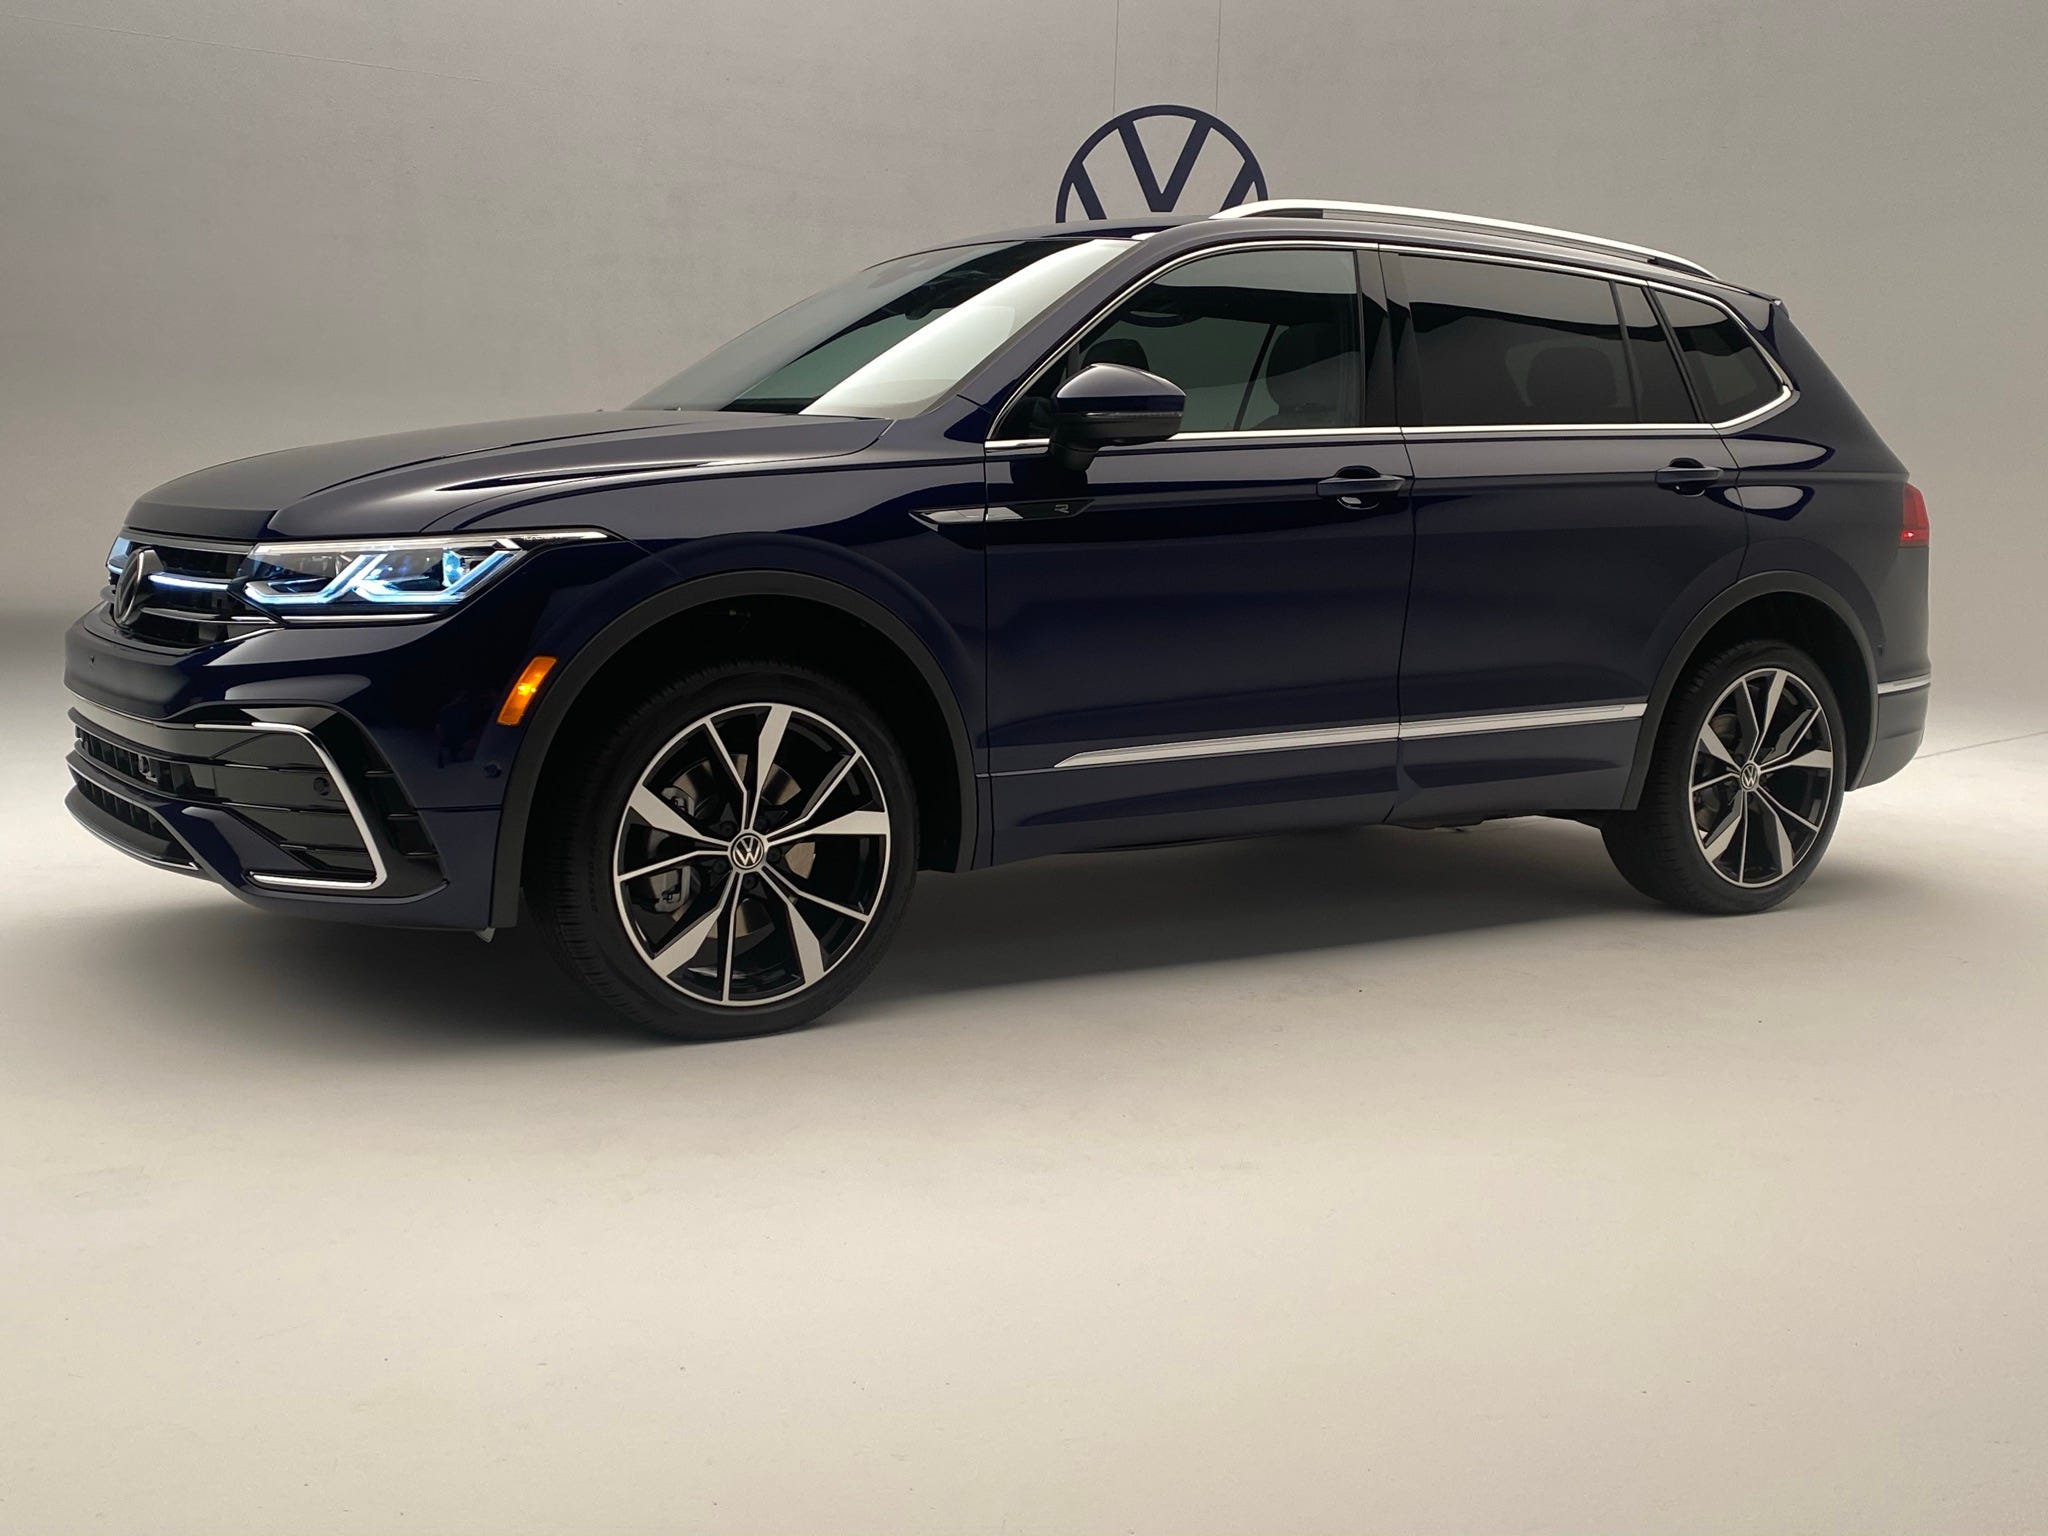 This feature will let you recognize the 2022 VW Tiguan a mile away